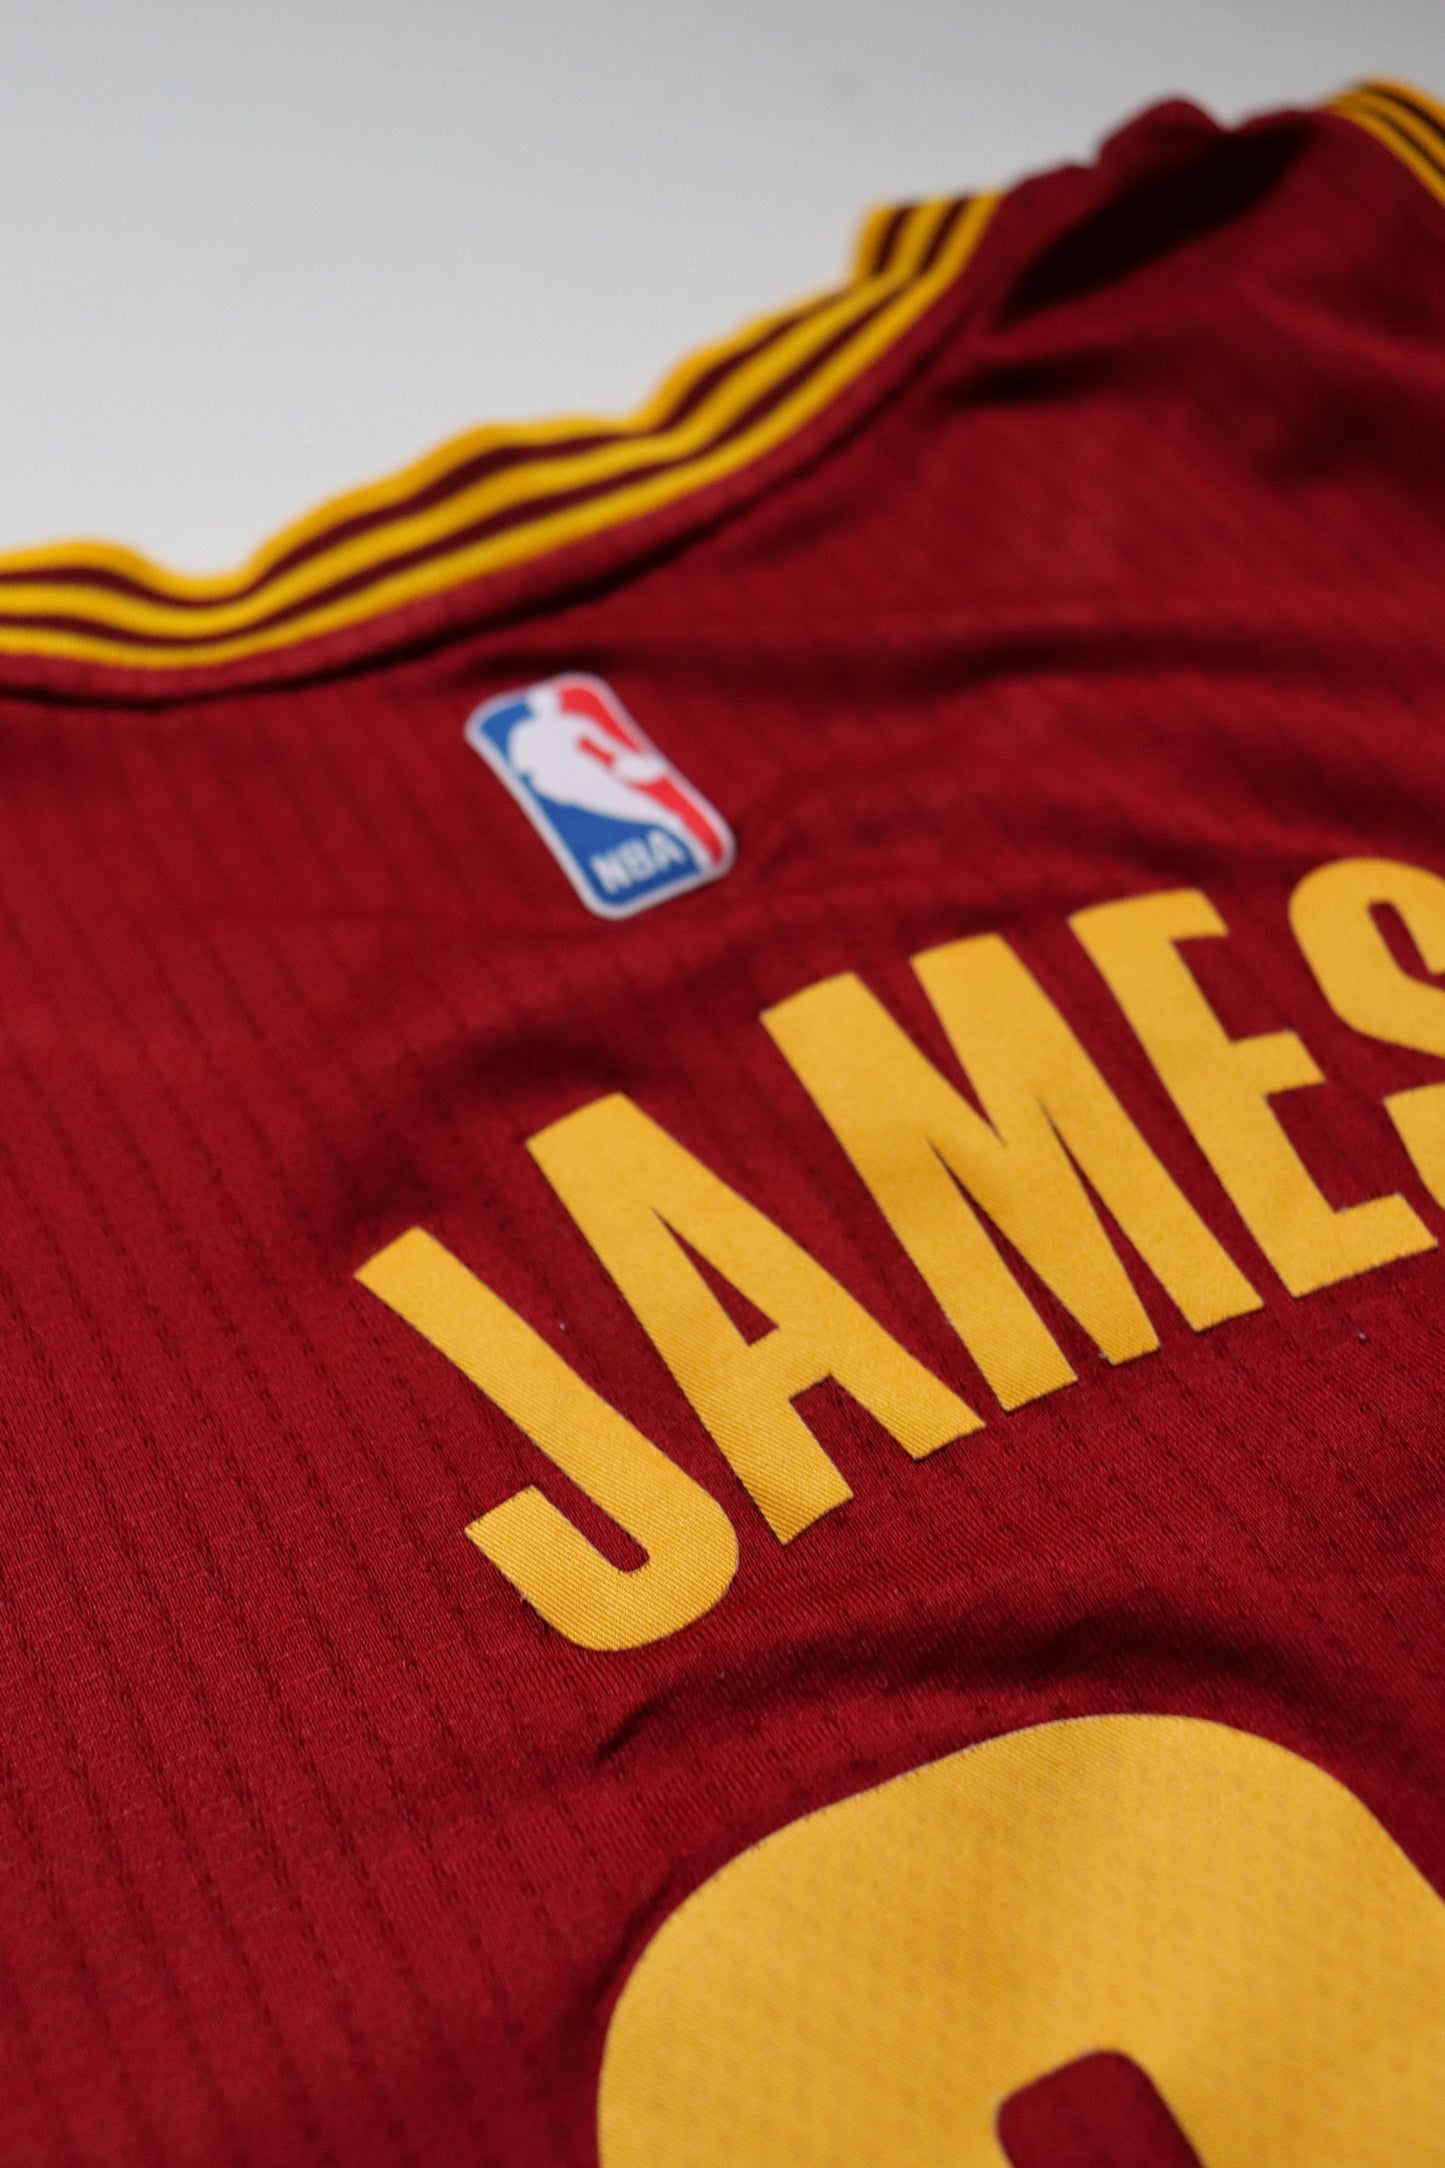 Maillot LeBron James Cleveland Cavaliers